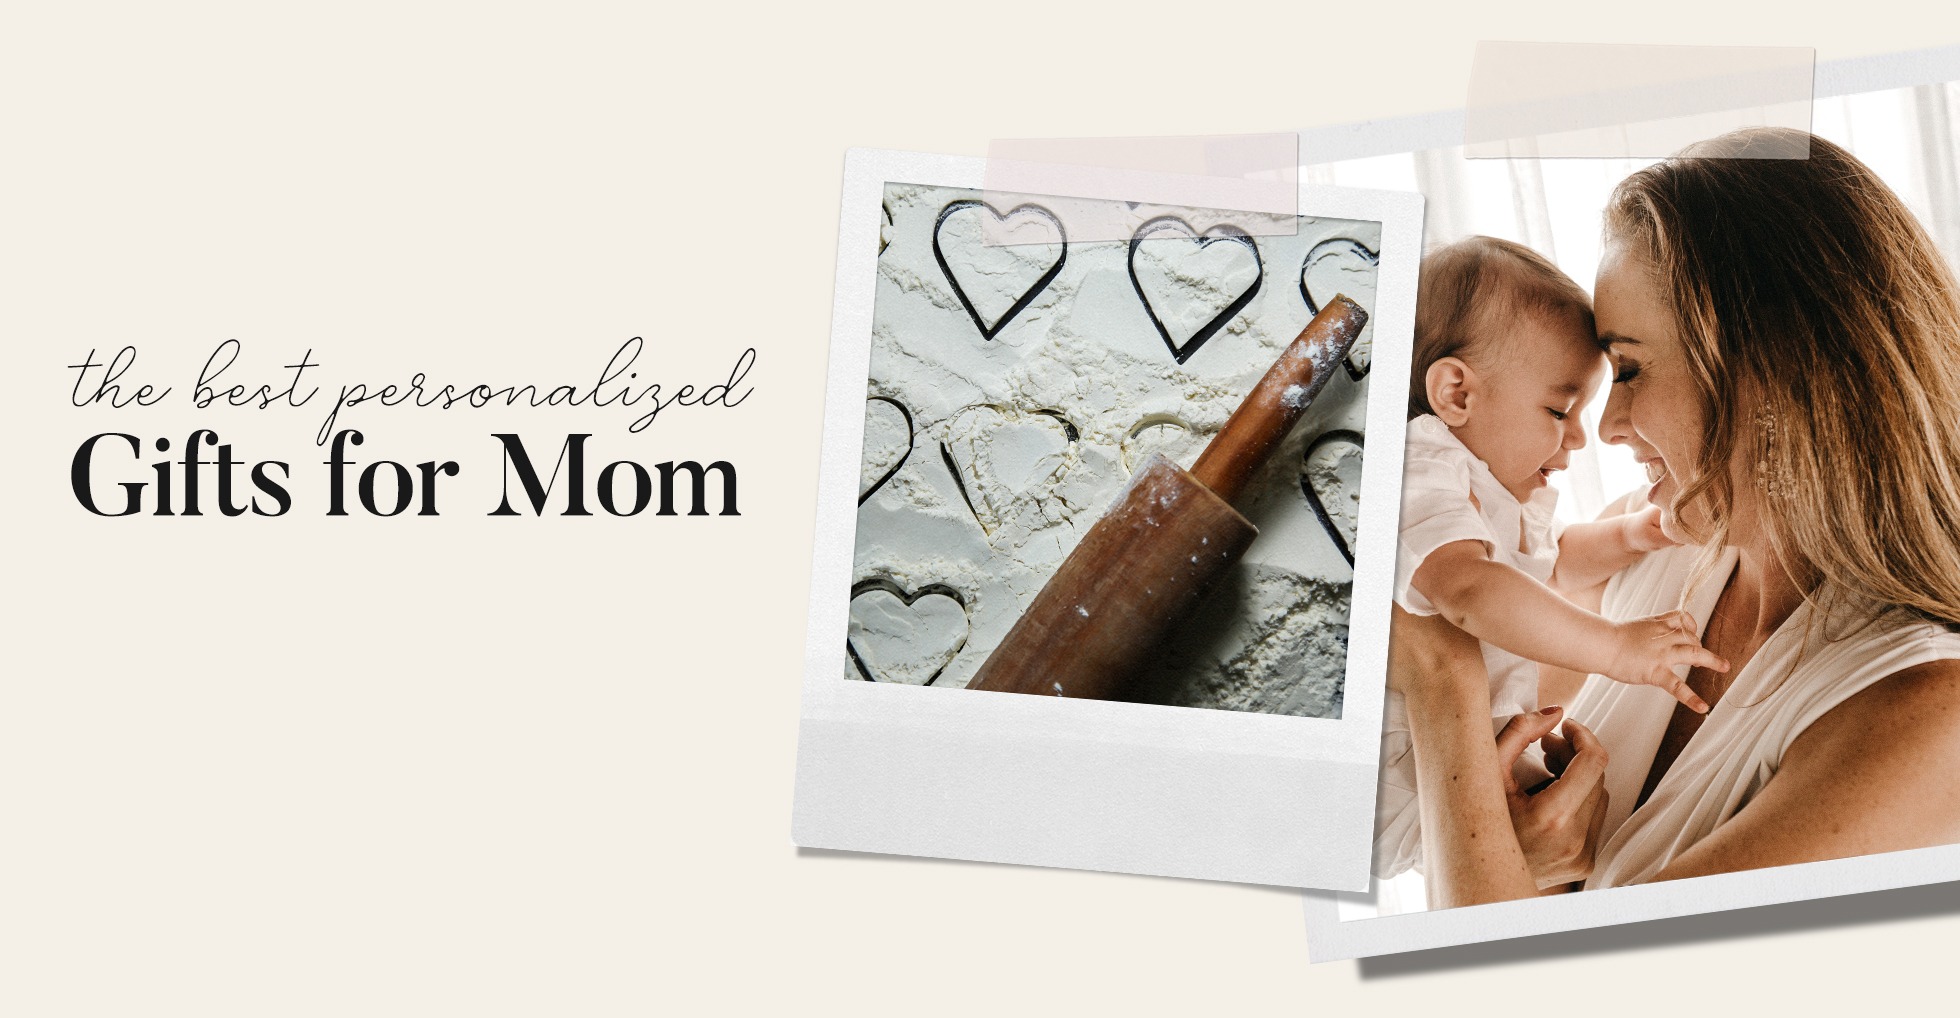 8 Best Personalized Gifts for Mom Guide